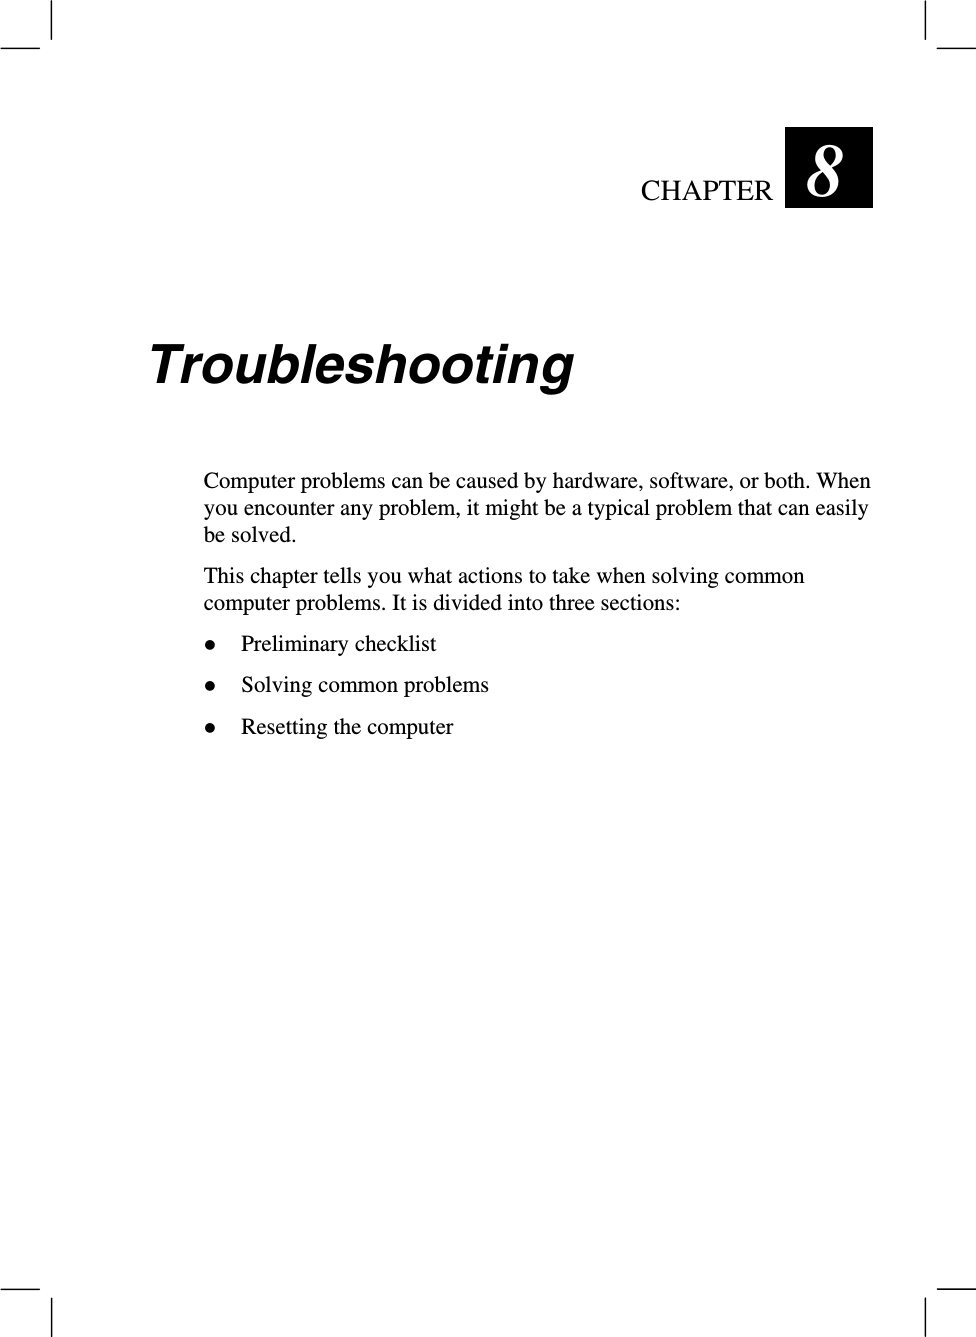 CHAPTER  8 TroubleshootingComputer problems can be caused by hardware, software, or both. Whenyou encounter any problem, it might be a typical problem that can easilybe solved.This chapter tells you what actions to take when solving commoncomputer problems. It is divided into three sections:z Preliminary checklistz Solving common problemsz Resetting the computer